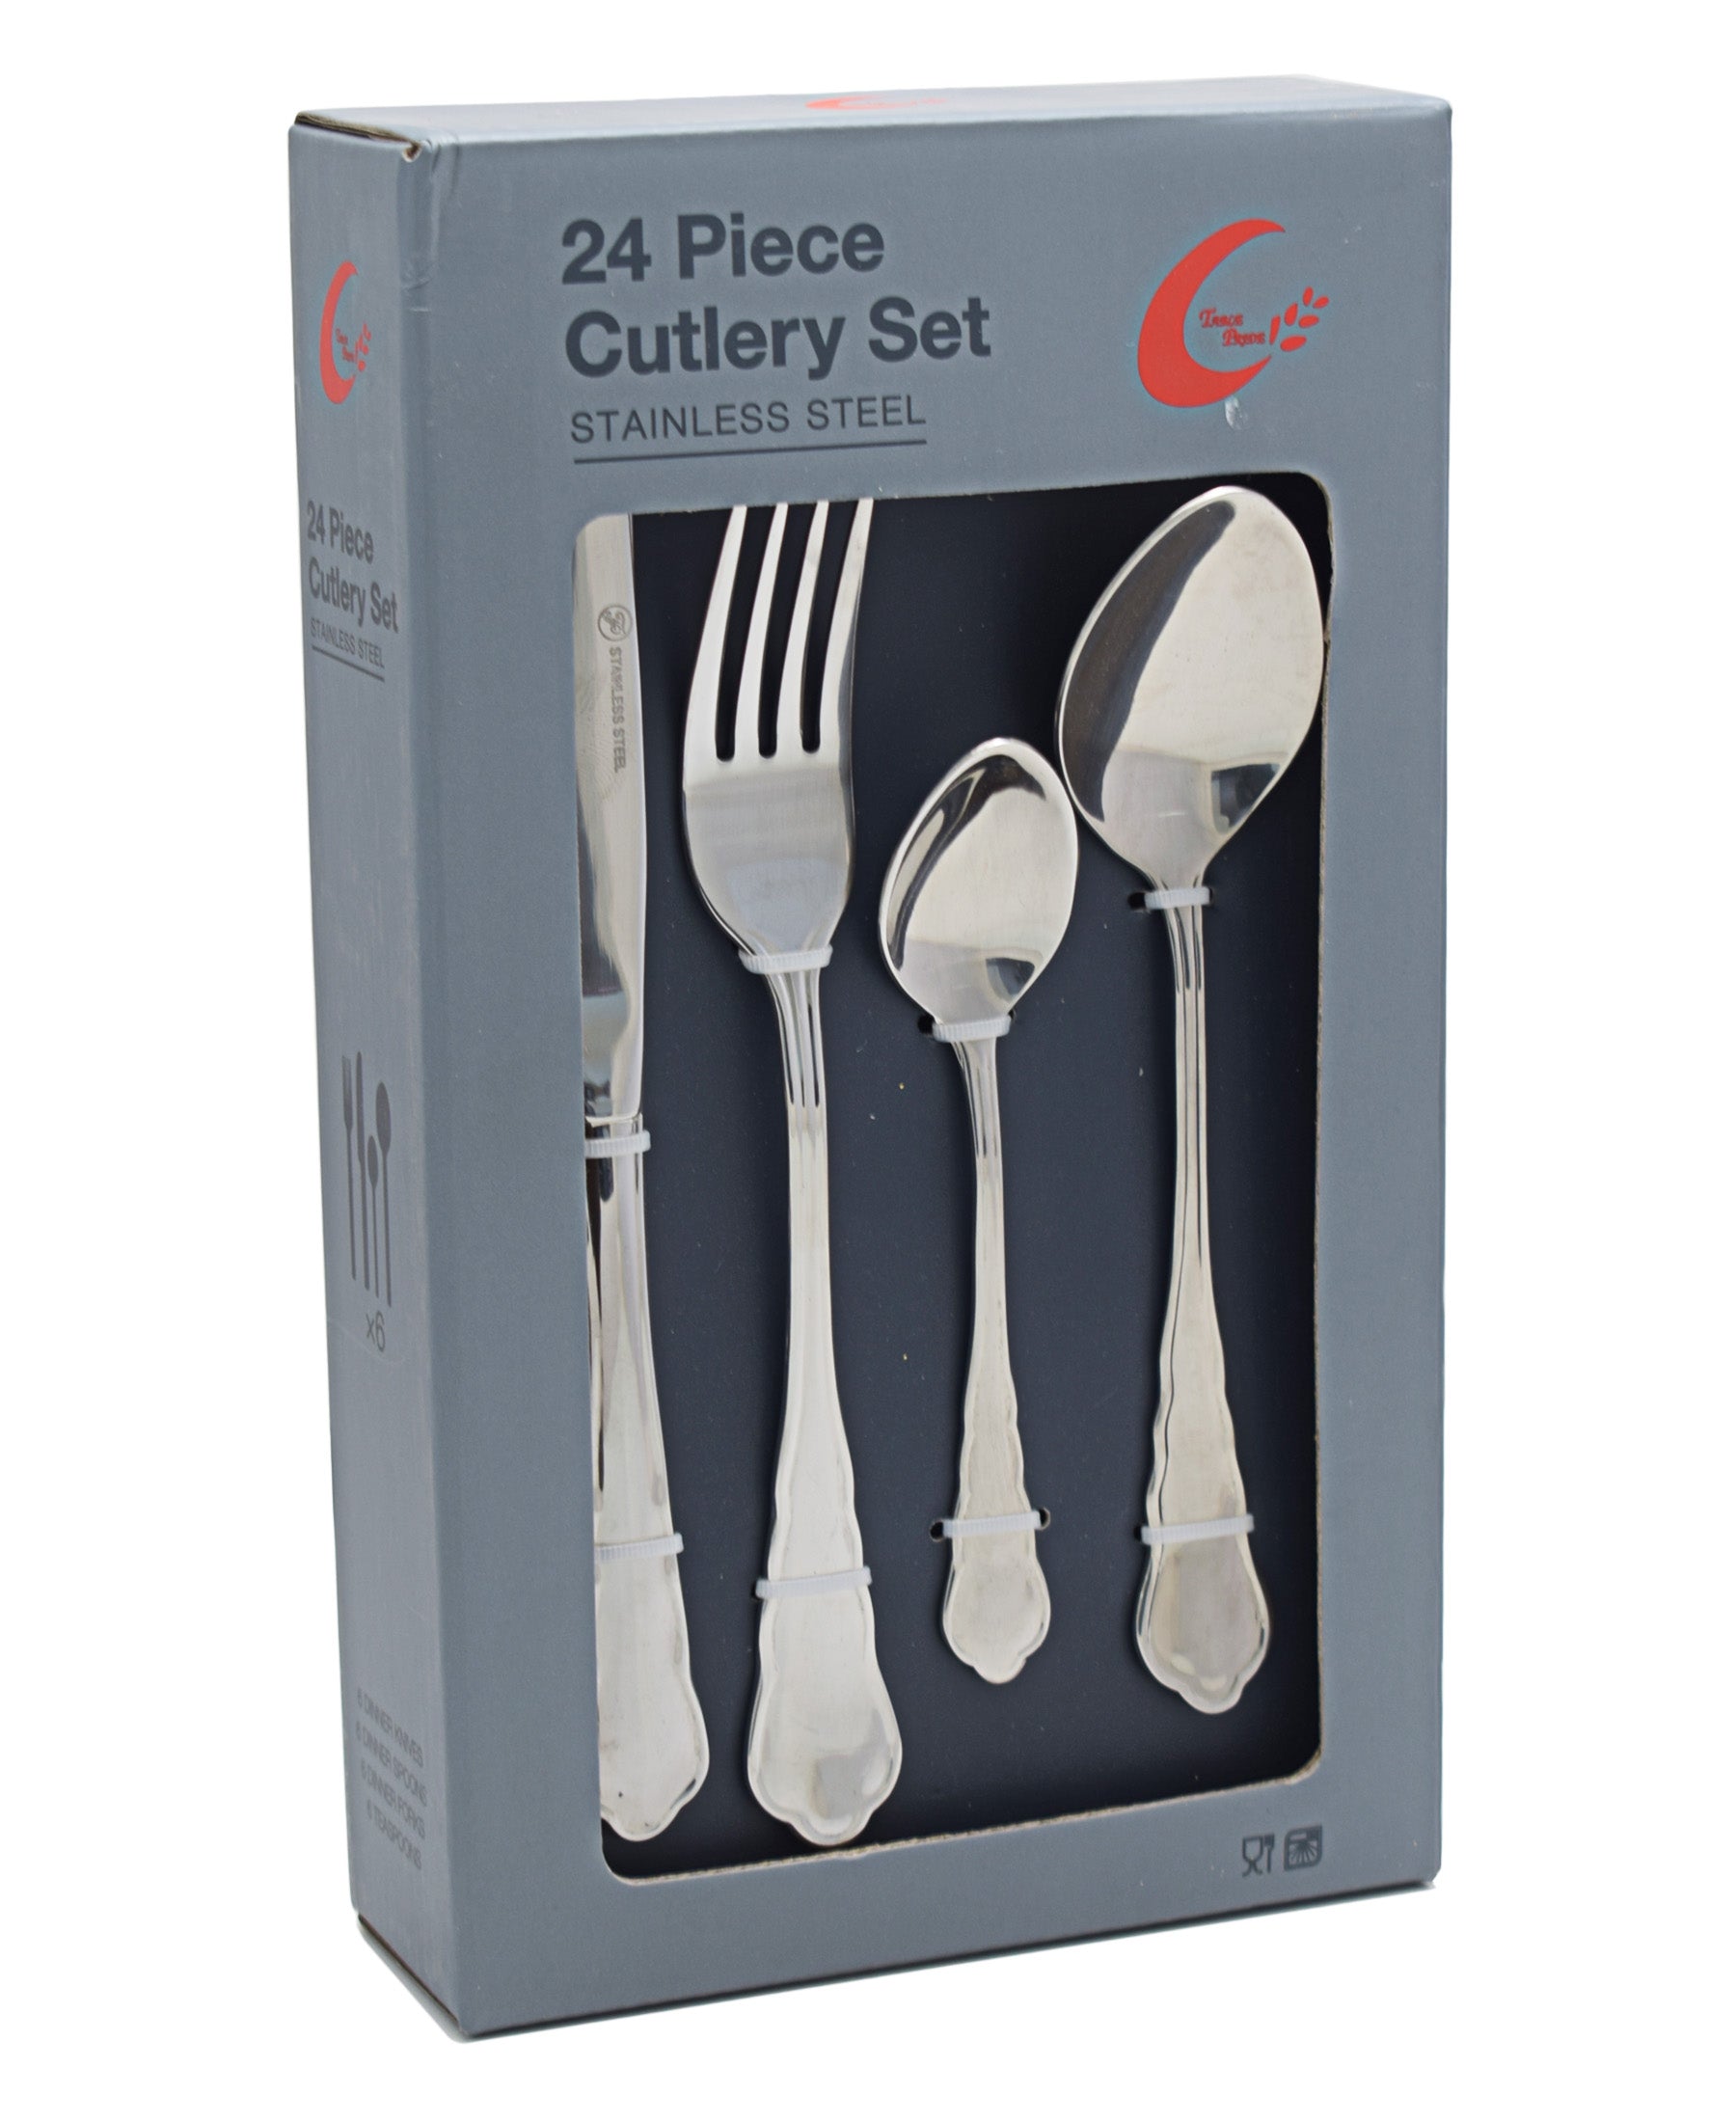 Table Pride 24 Piece Stainless Steel Cutlery Set - Silver